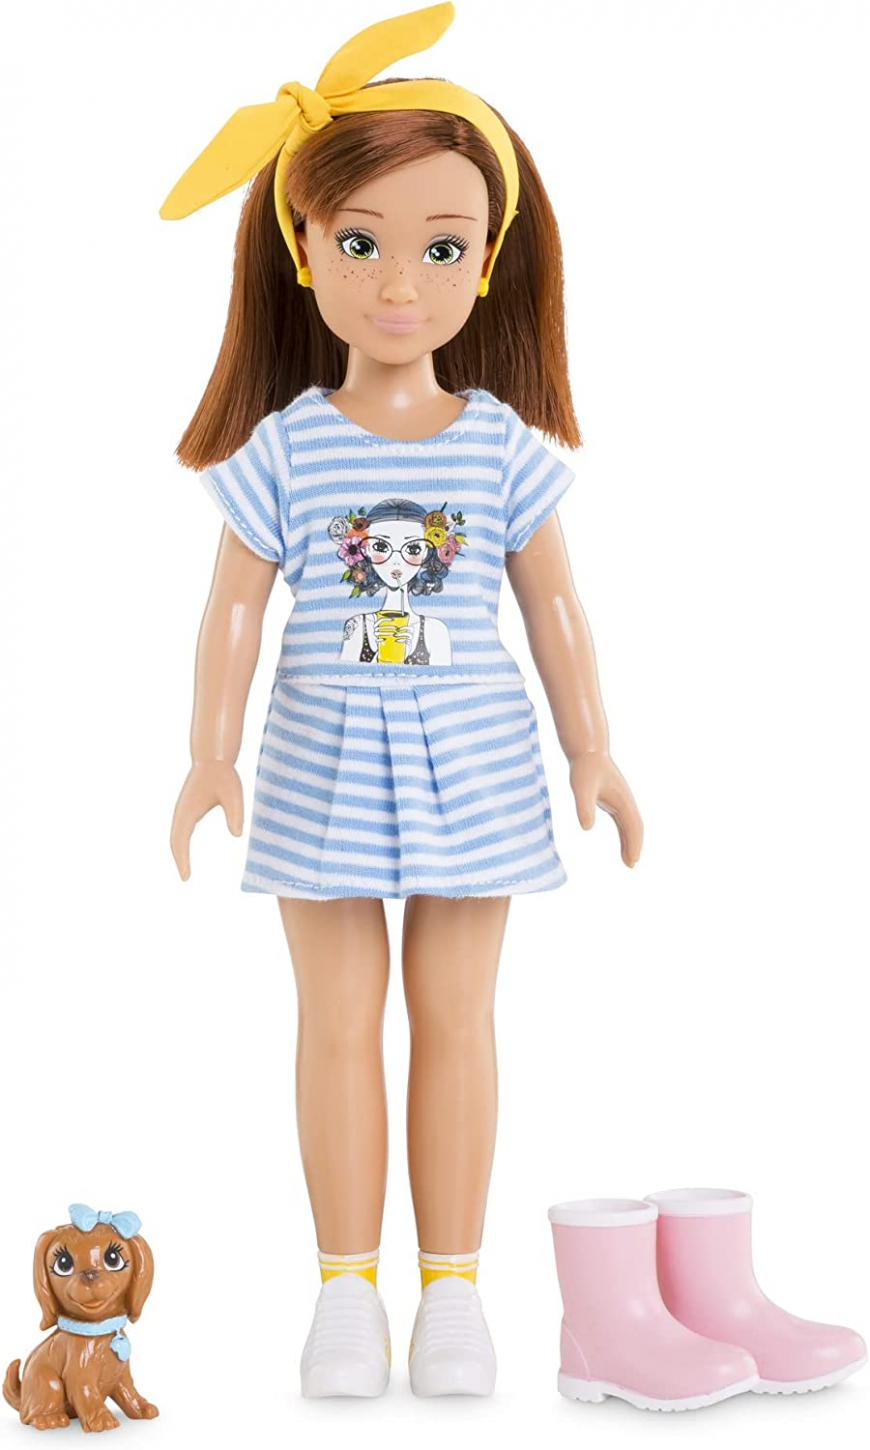 Corolle Girls Zoé Nature & Adventure doll